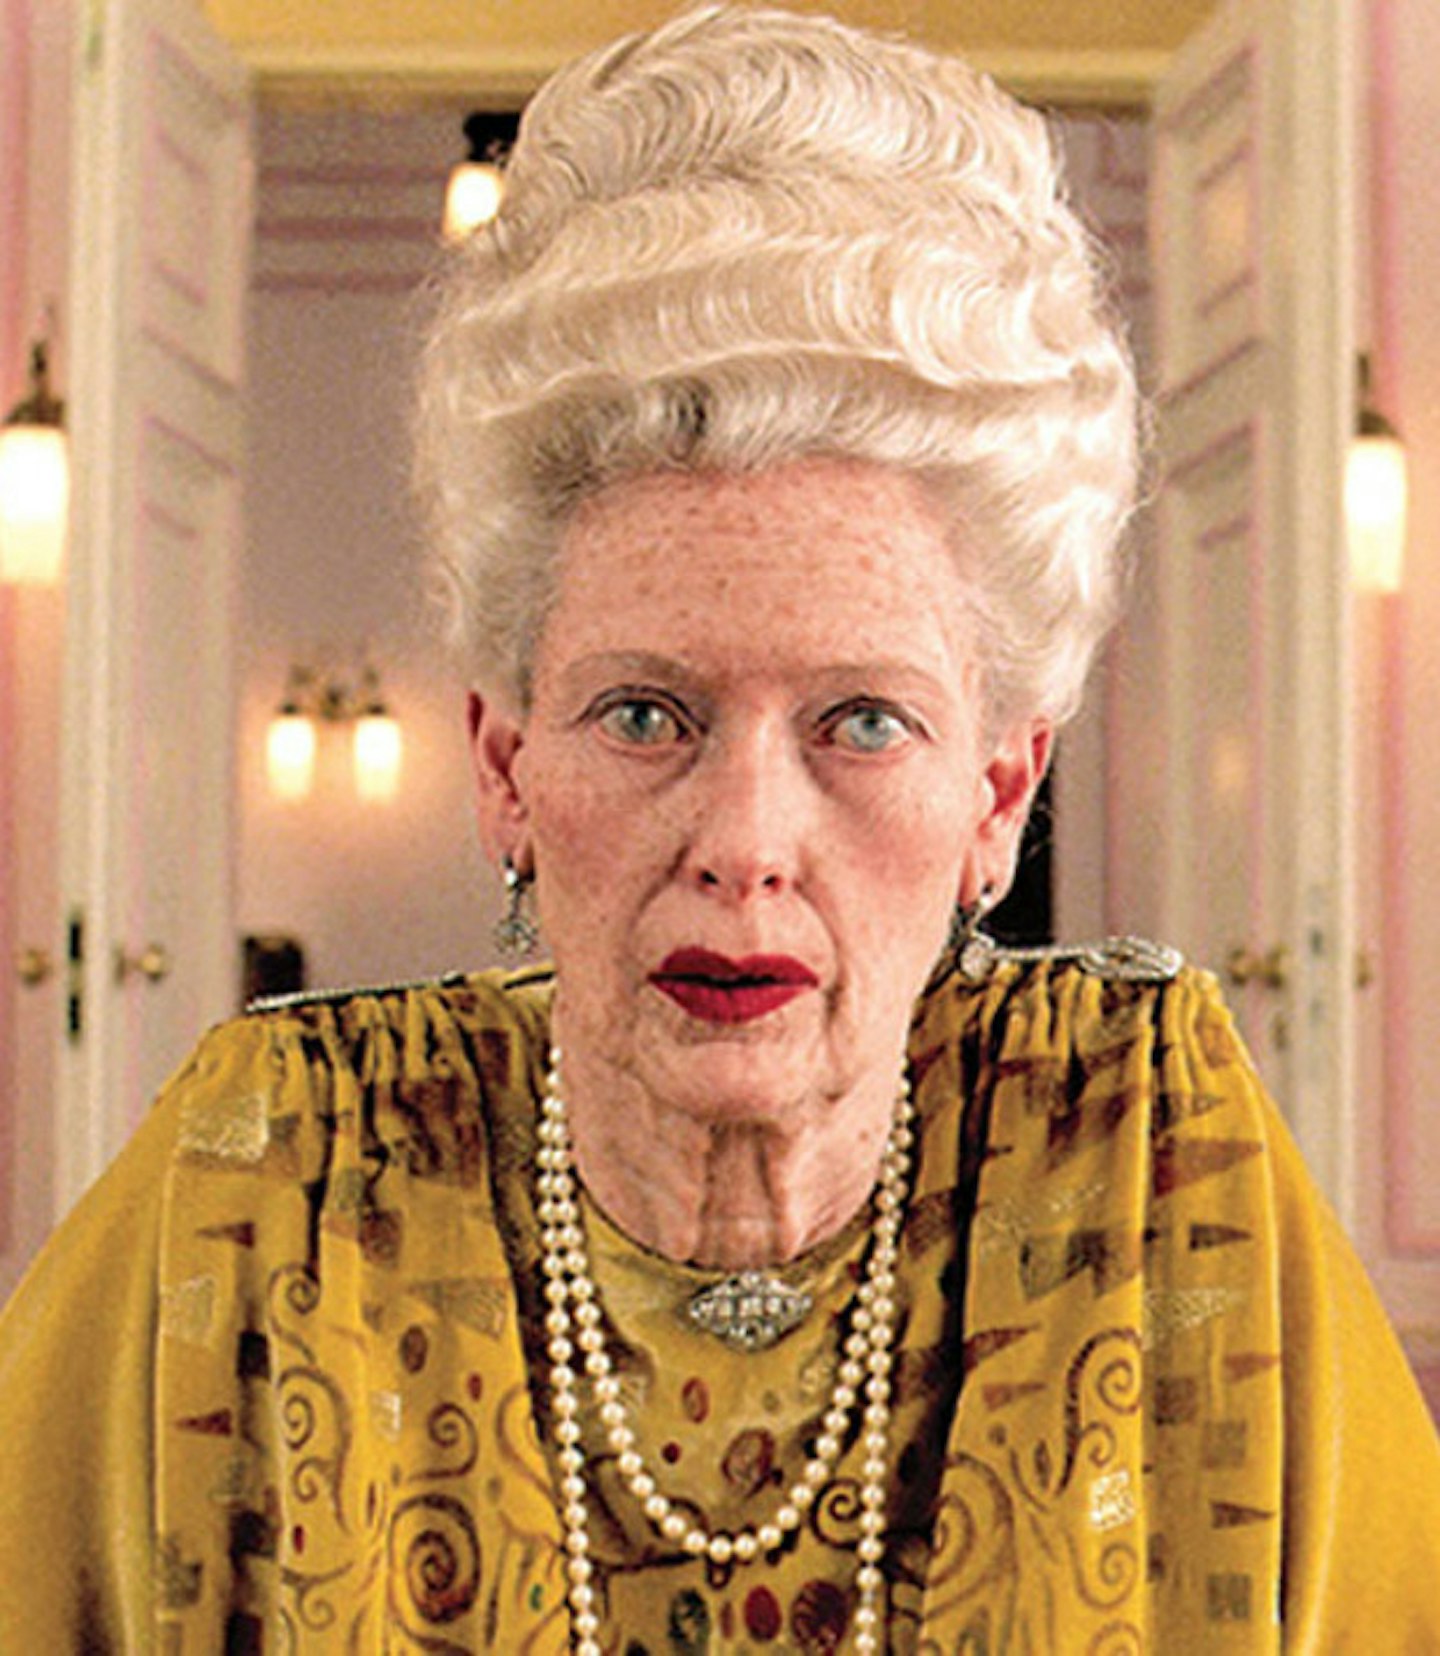 Best Make-Up And Hairstyling winner: Frances Hannon and Mark Coulier for The Grand Budapest Hotel.